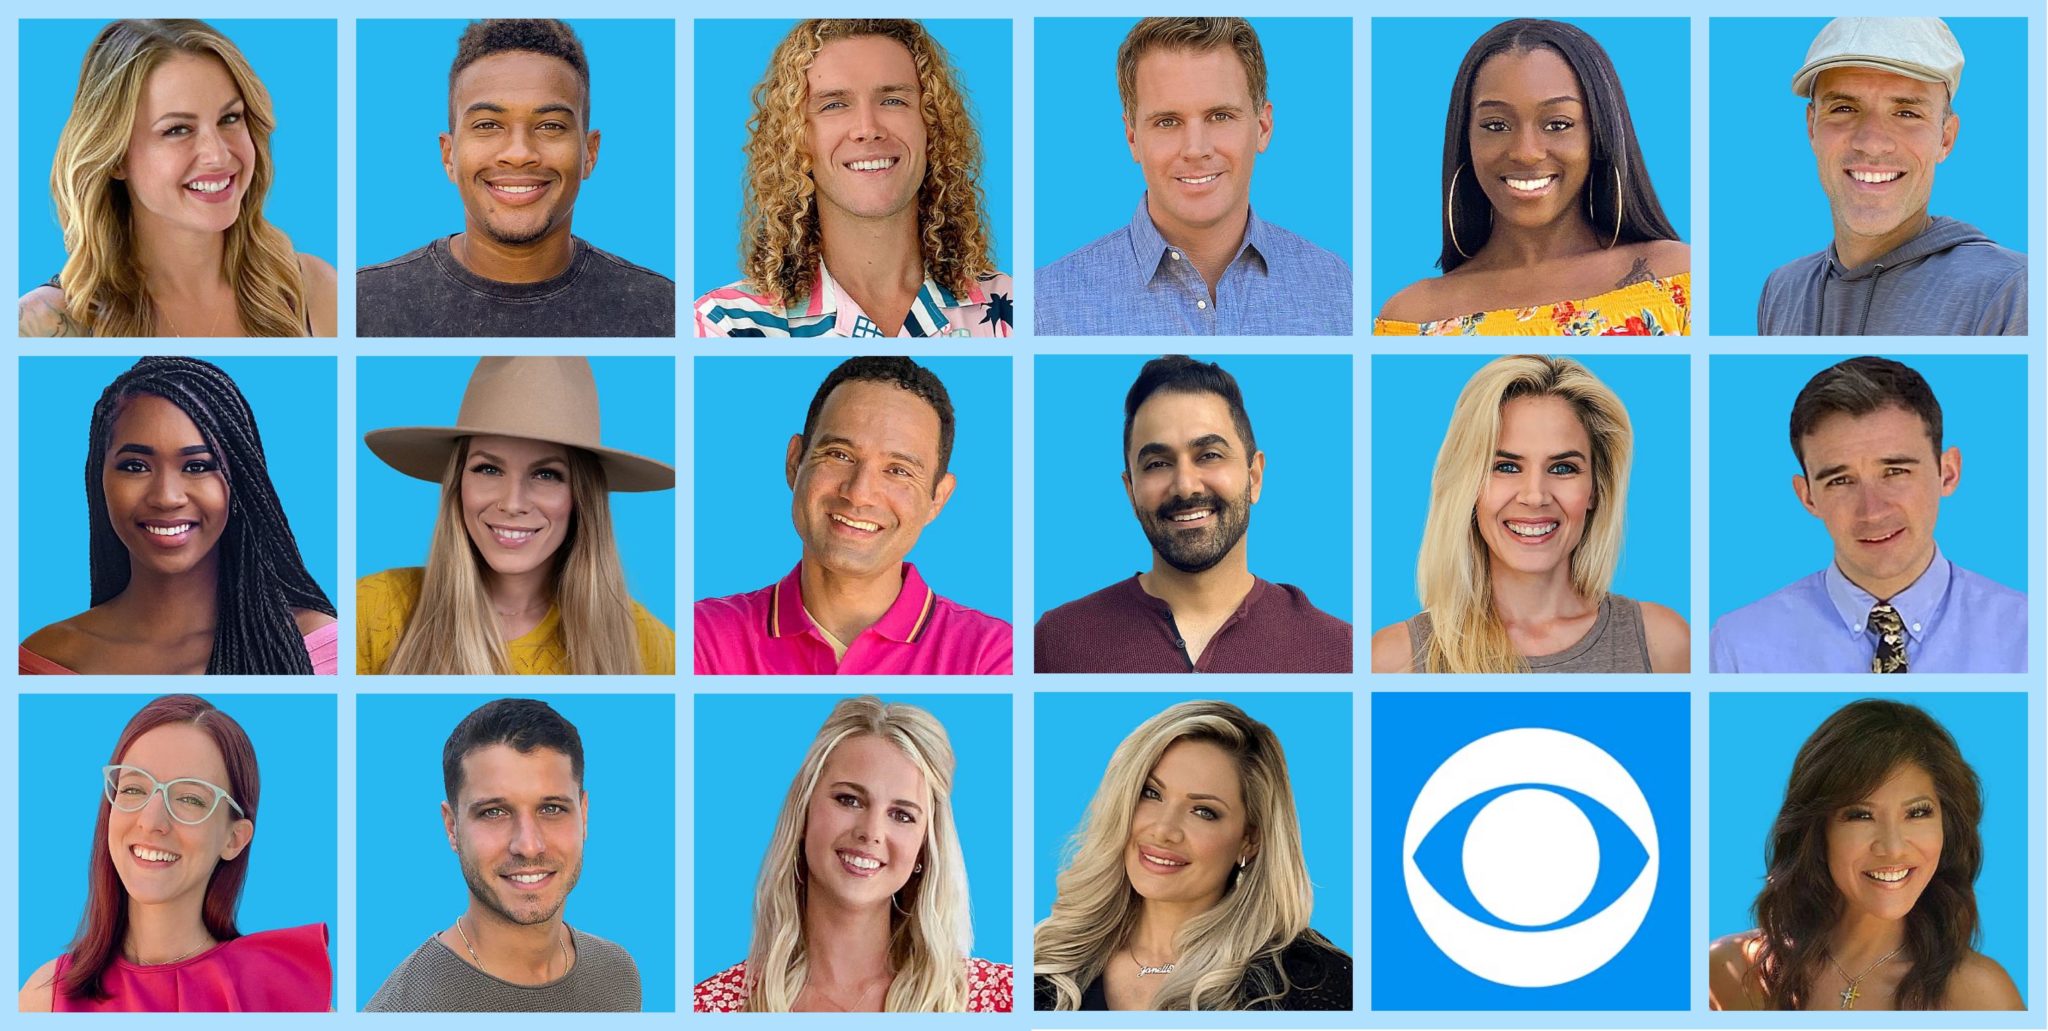 Big Brother 23: Meet the Cast of the New Season - wide 5